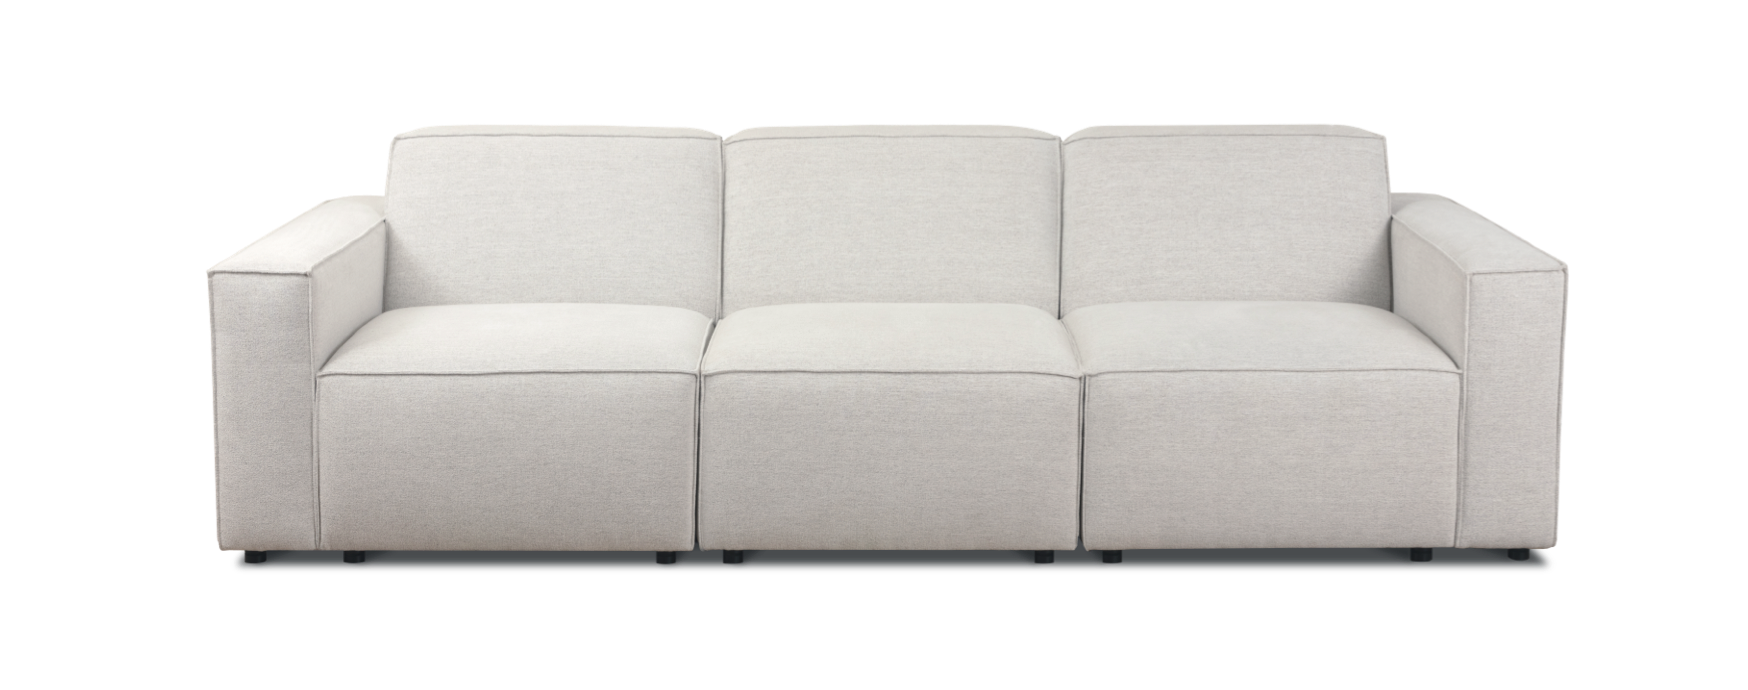 Product image showing the Endy Modular Sofa.